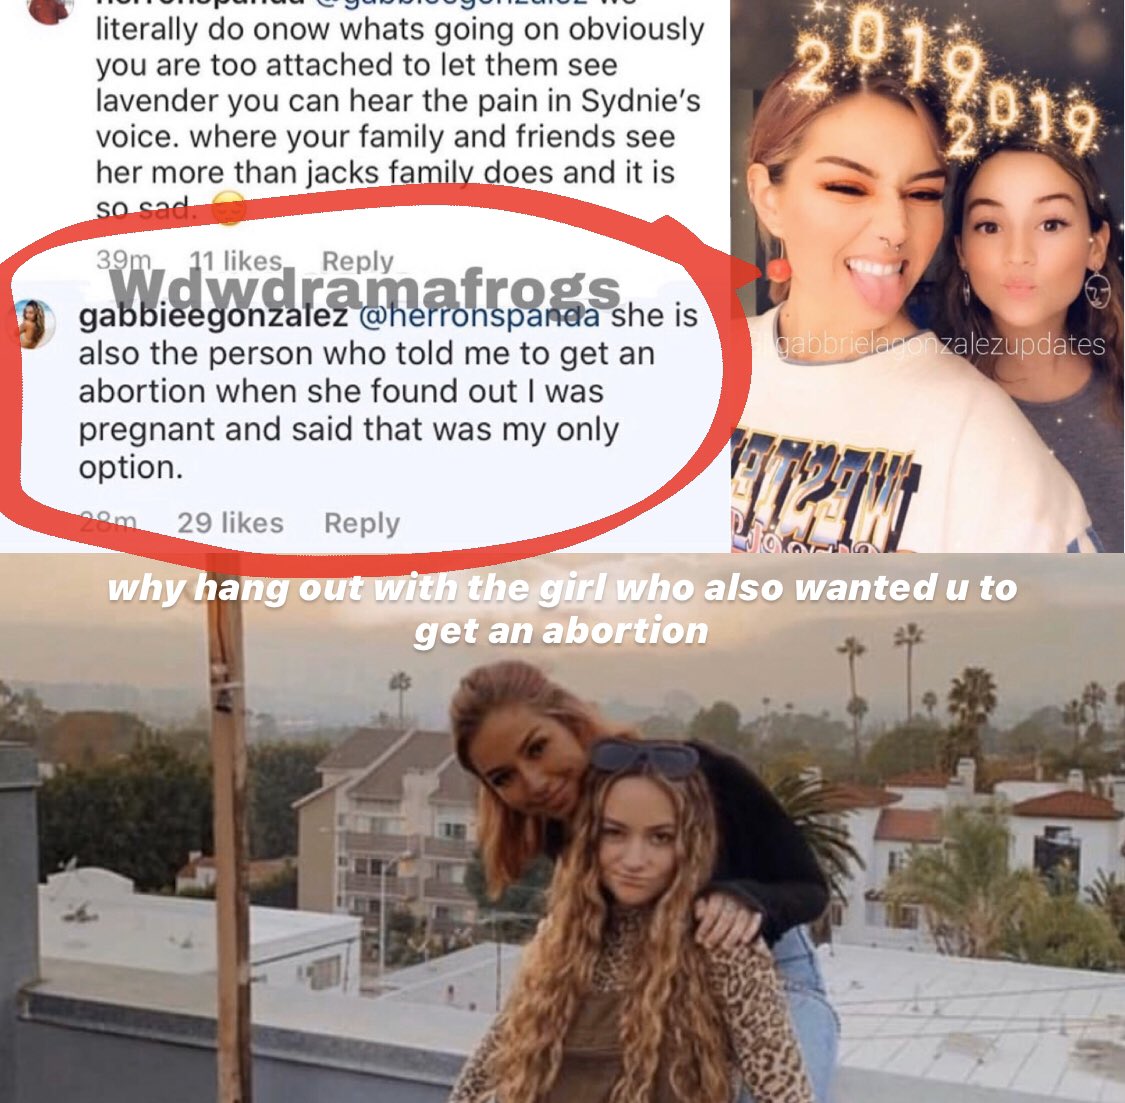 gabbie also posted a tiktok about how she was forced to hide her pregnancy because of jacks management who told her that she should get an abortion. later then she answered on a comment where she said that sydnie (jacks sister) was actually the one who told her to get an abortion